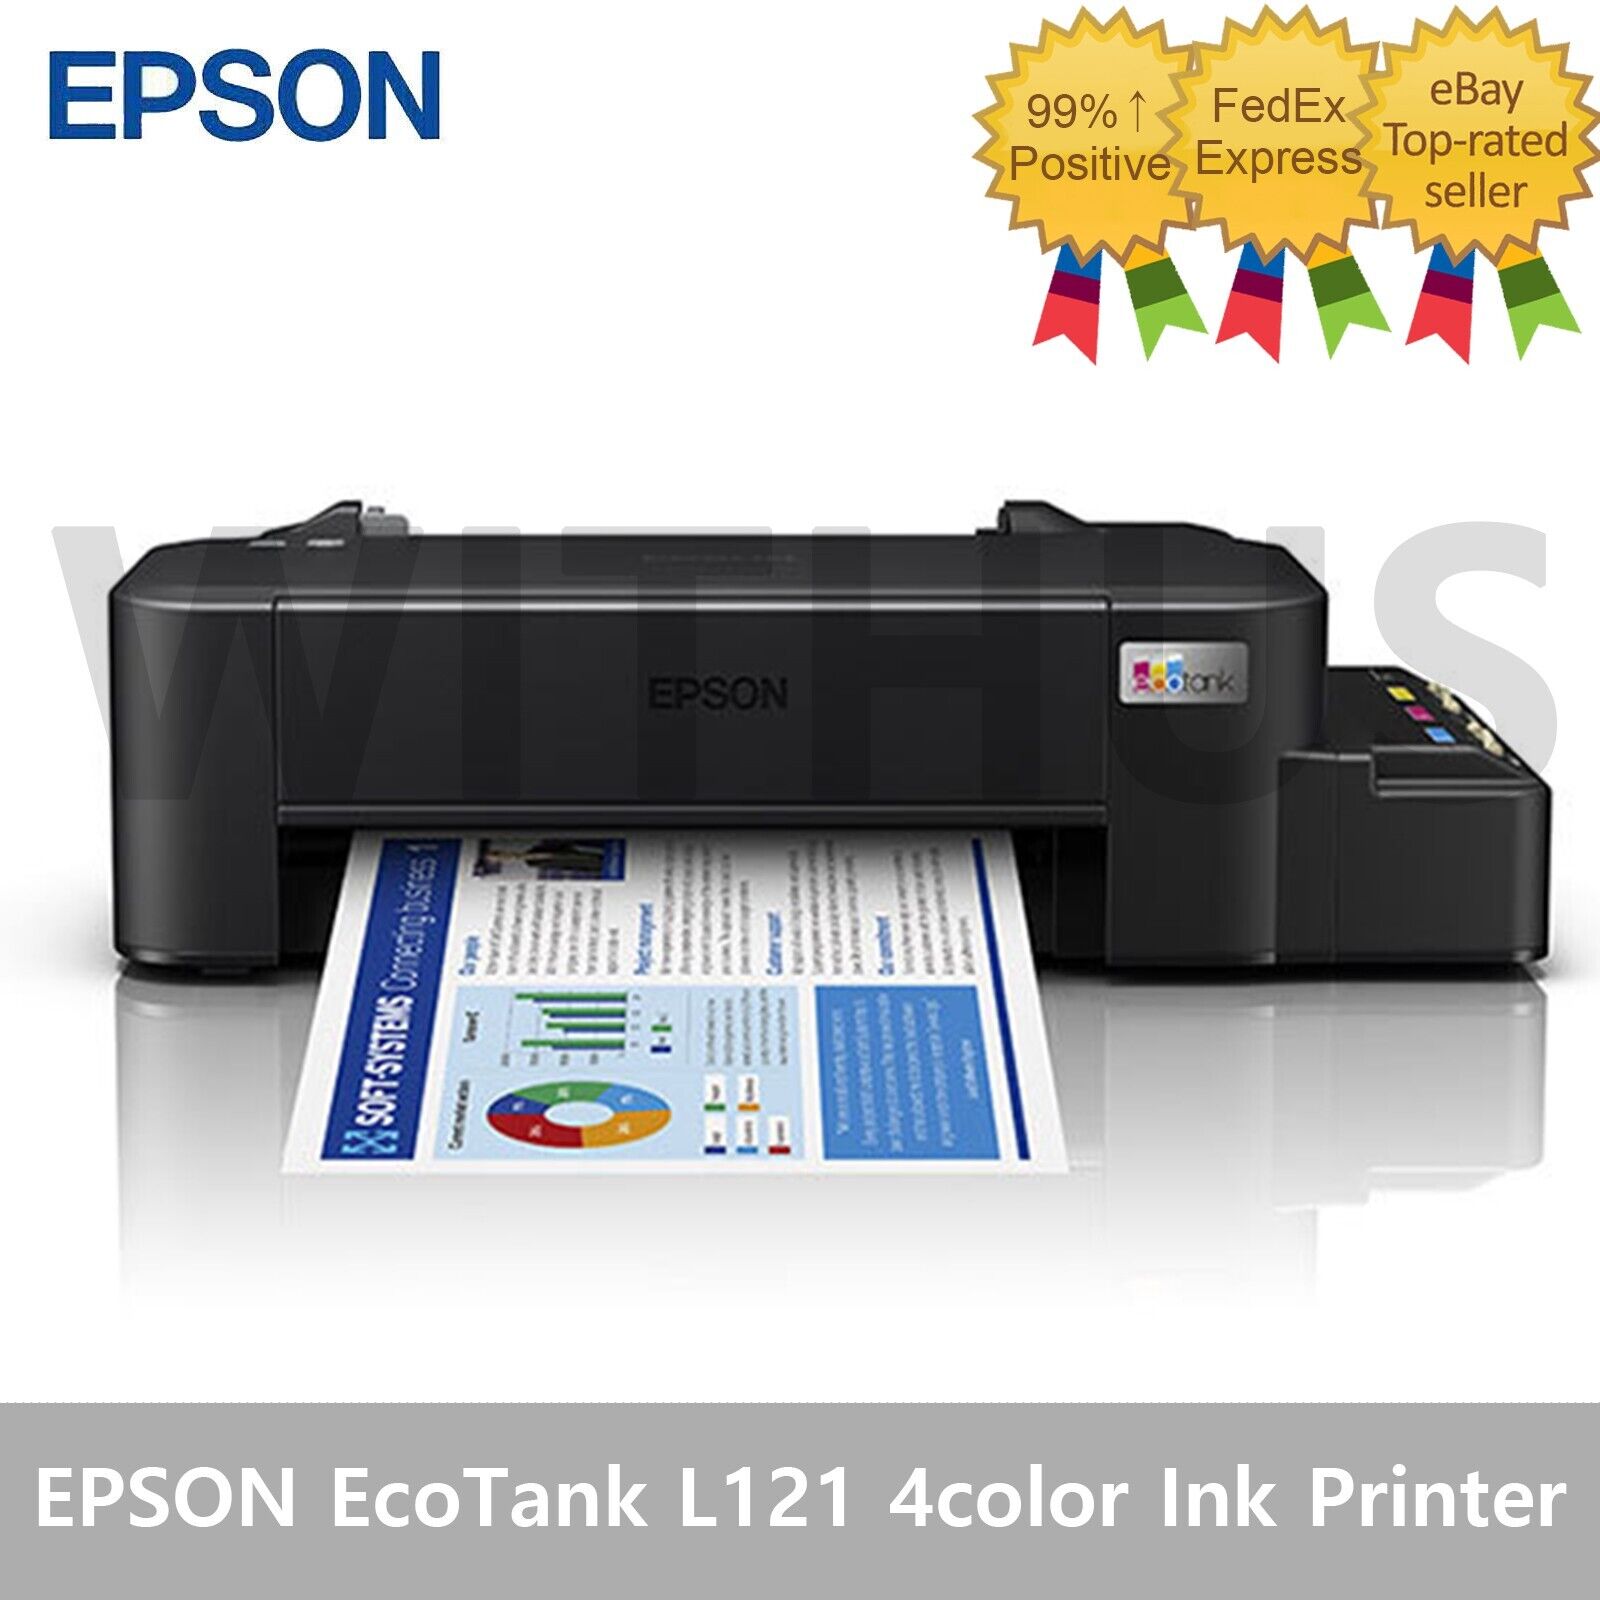 EPSON EcoTank L121 Ink Printer System Compact Size 4-color - Tracking